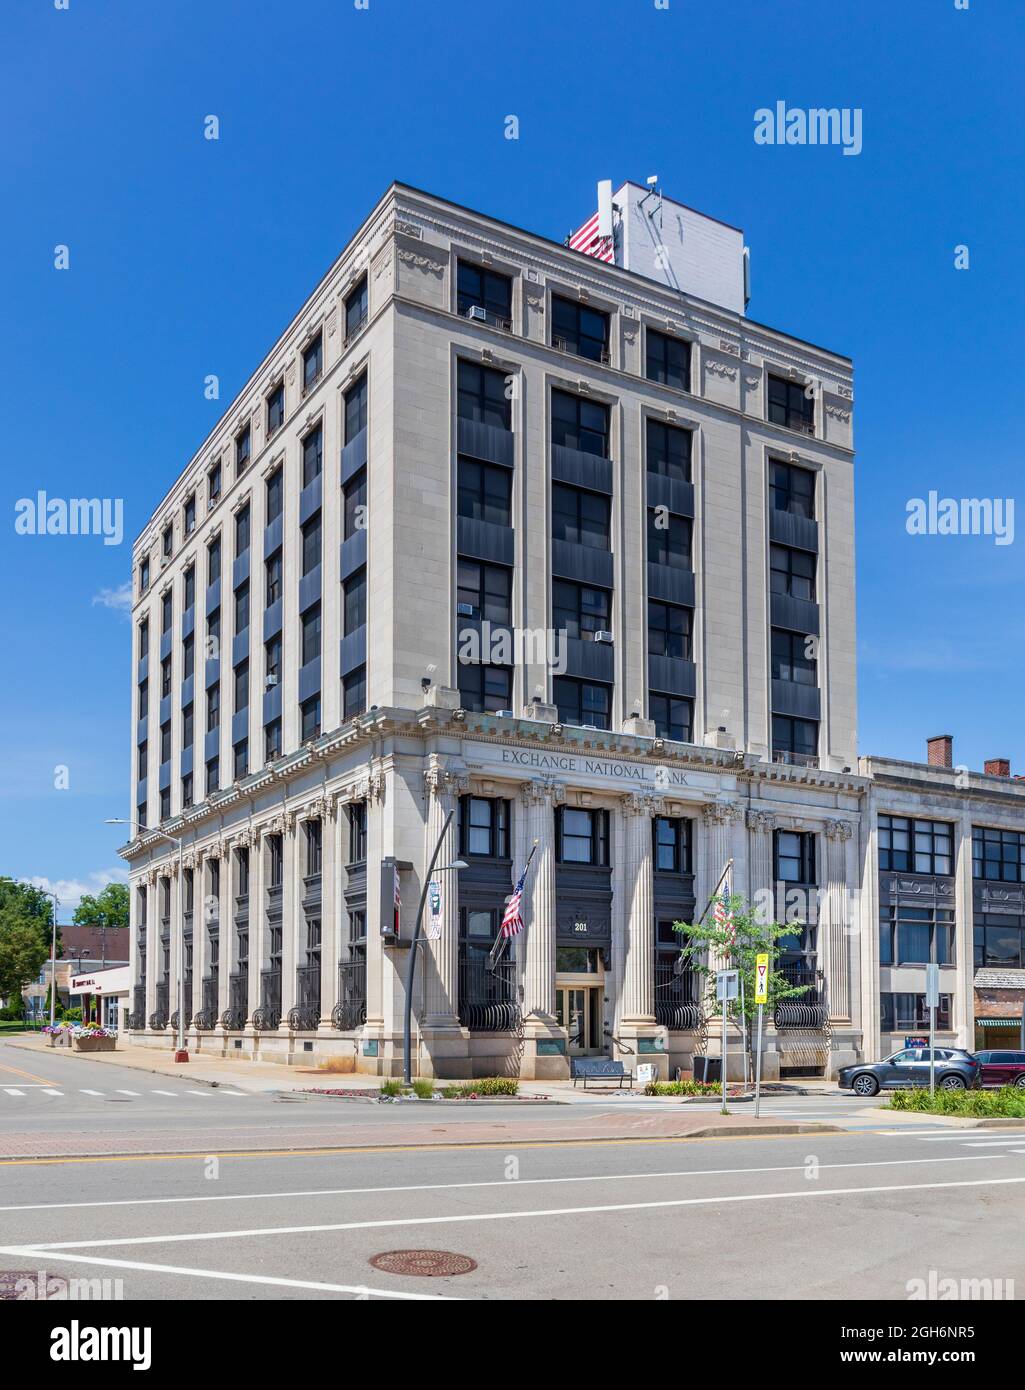 OLEAN, NY, USA-14 AUGUST 2021: Building of the defunct Exchange National Bank, now occupied by Community Bank. Stock Photo